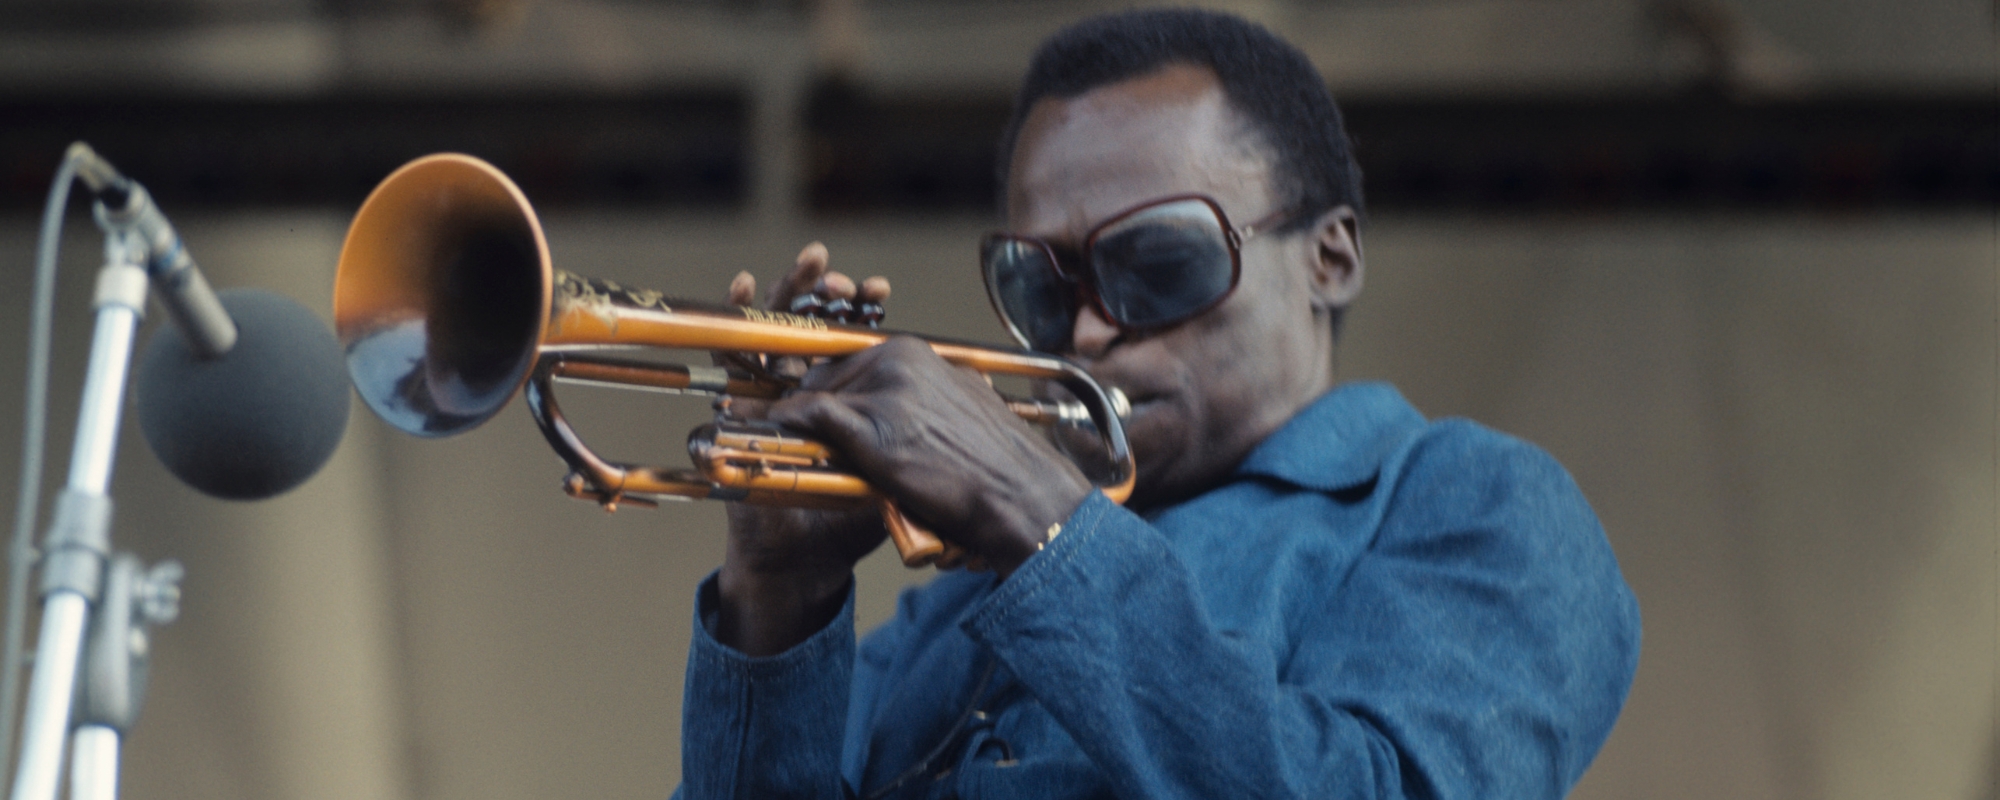 Miles Davis Hated the Steve Miller Band, so This Is What He Did When He Opened for Them